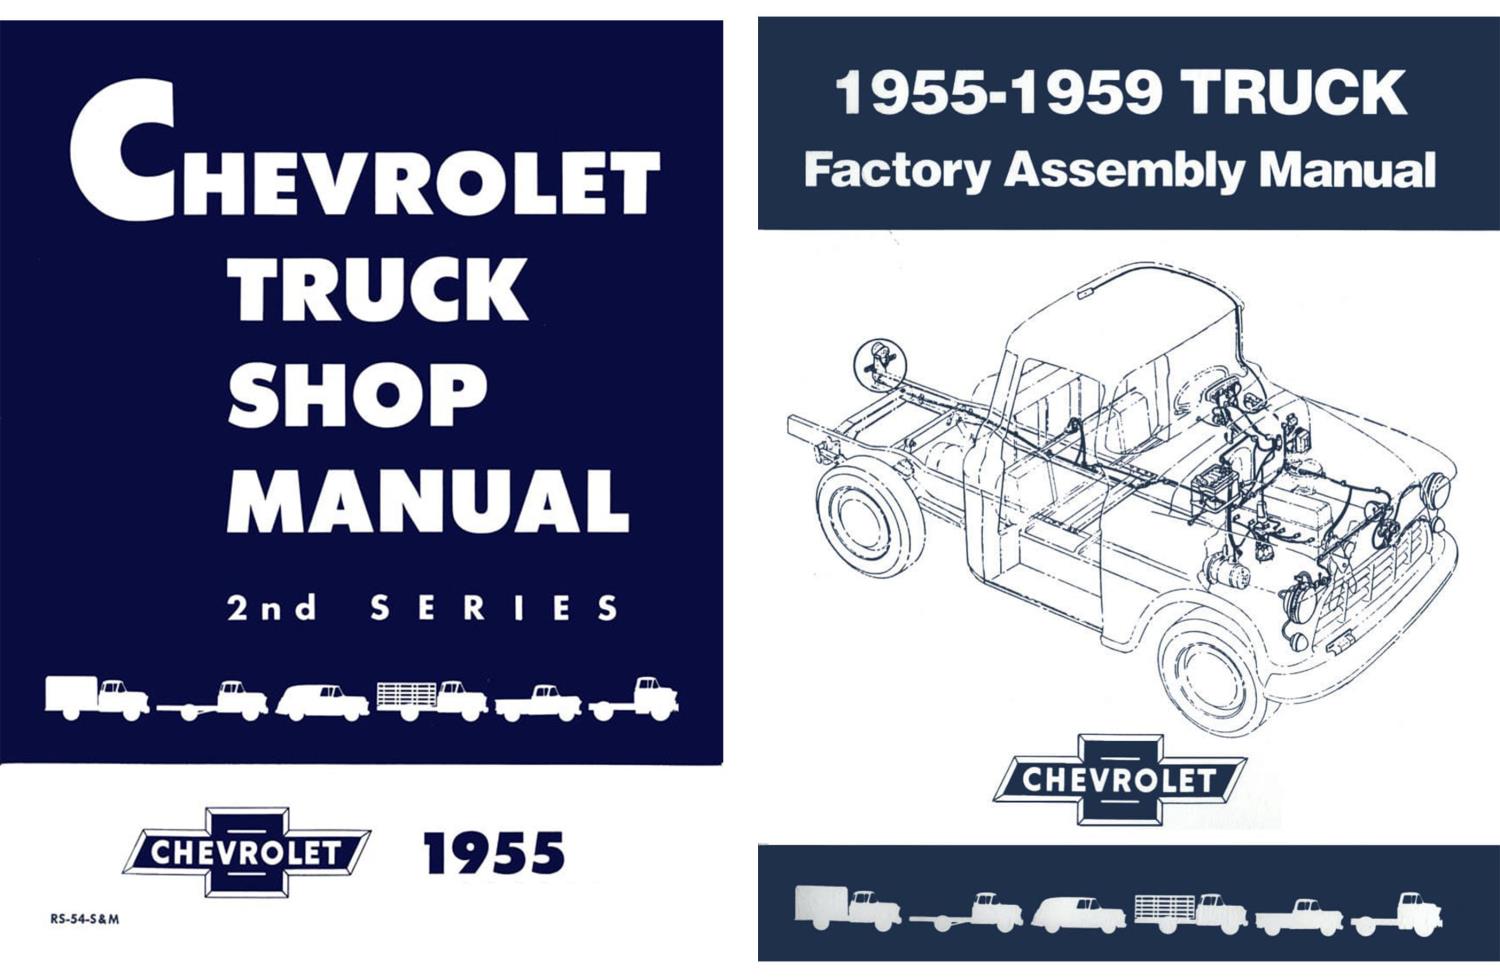 Shop and Assembly Manual Set for 1955 Chevrolet Trucks [2nd-Series]